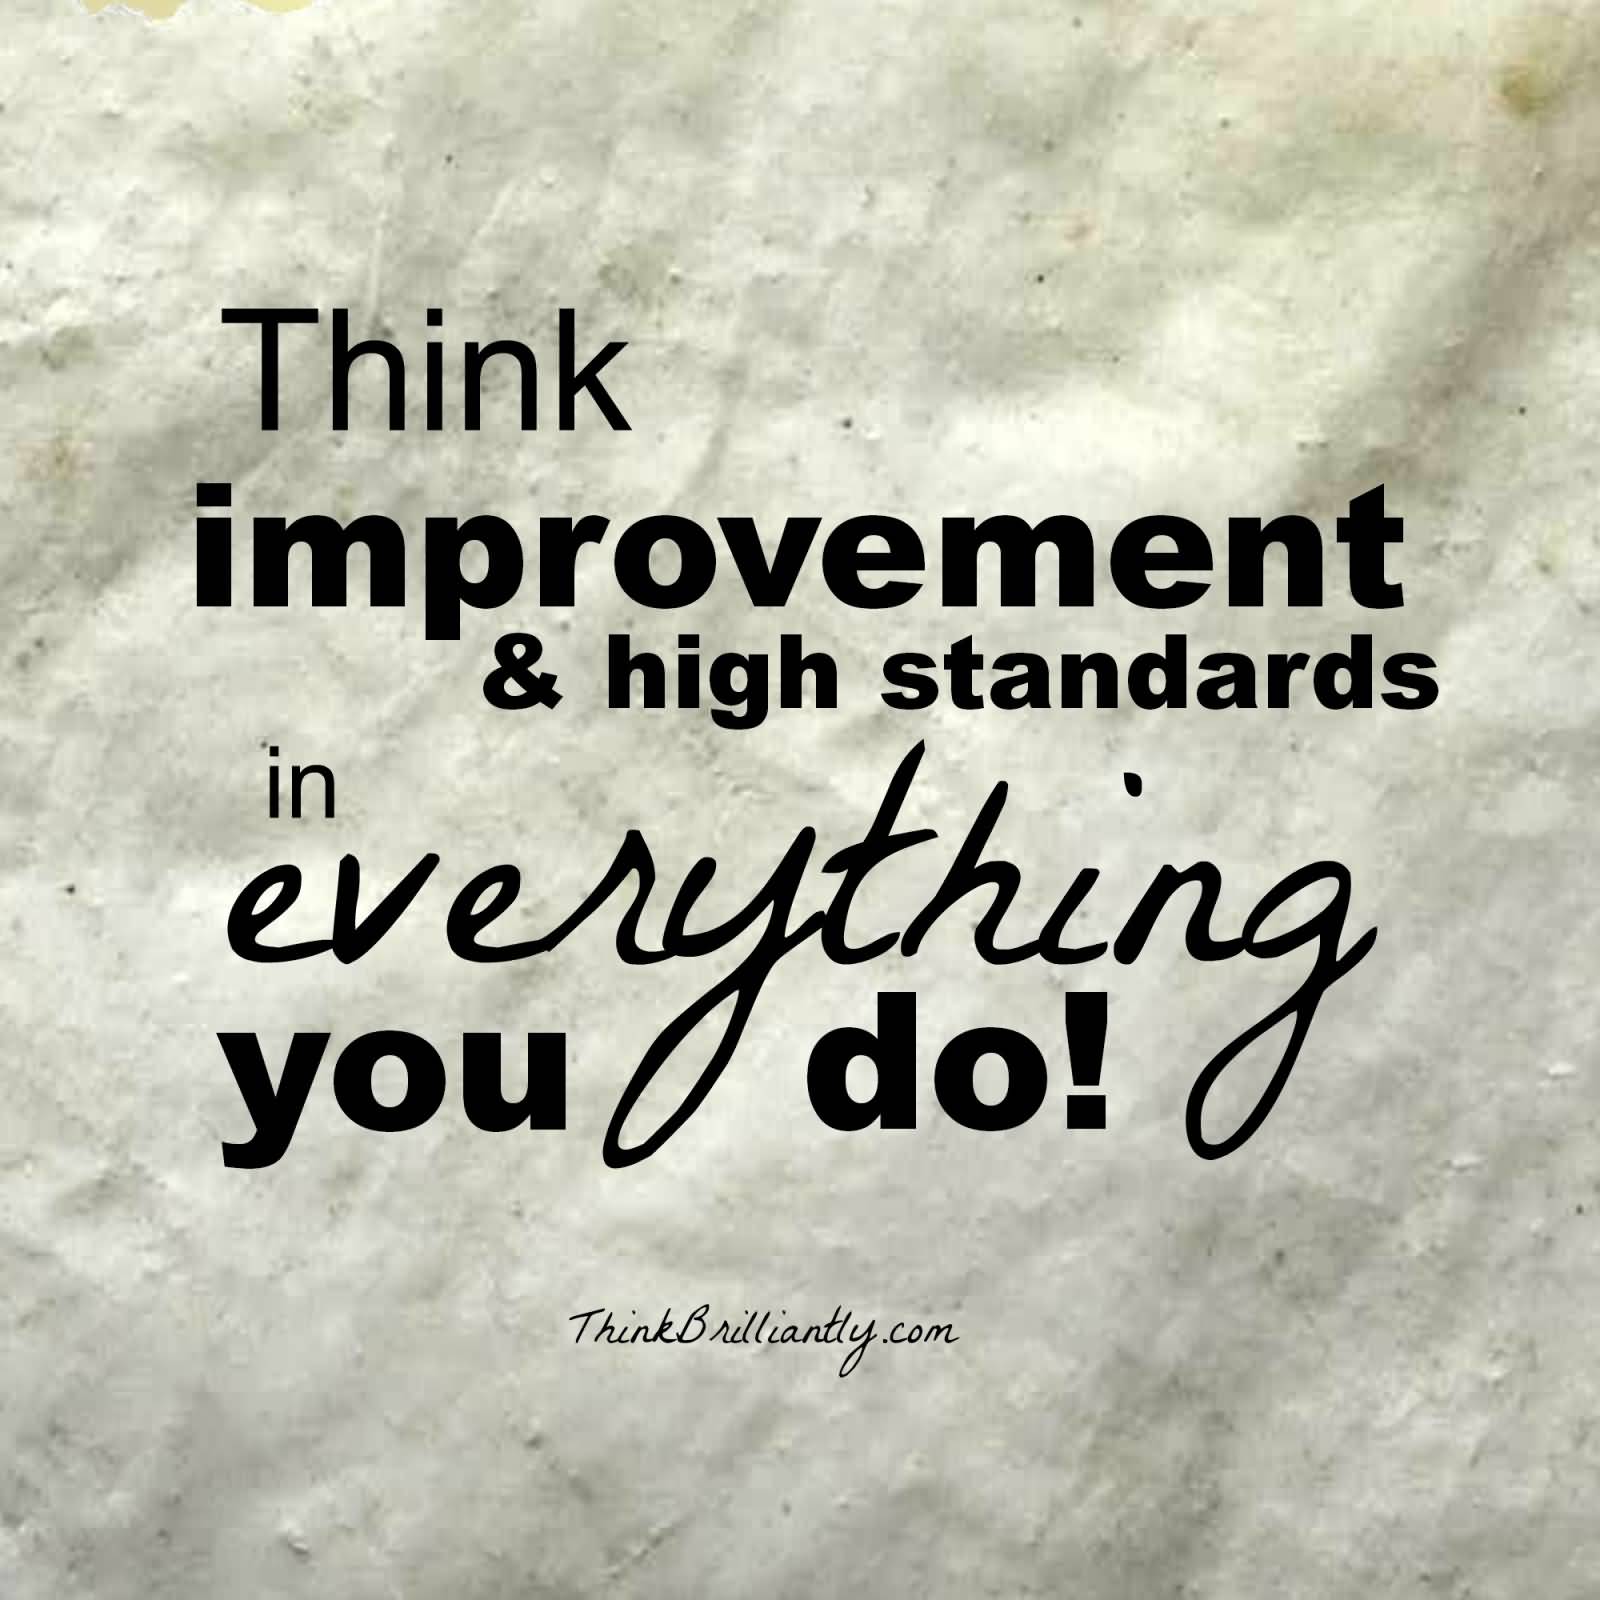 Think improvement & high standards in everything you do